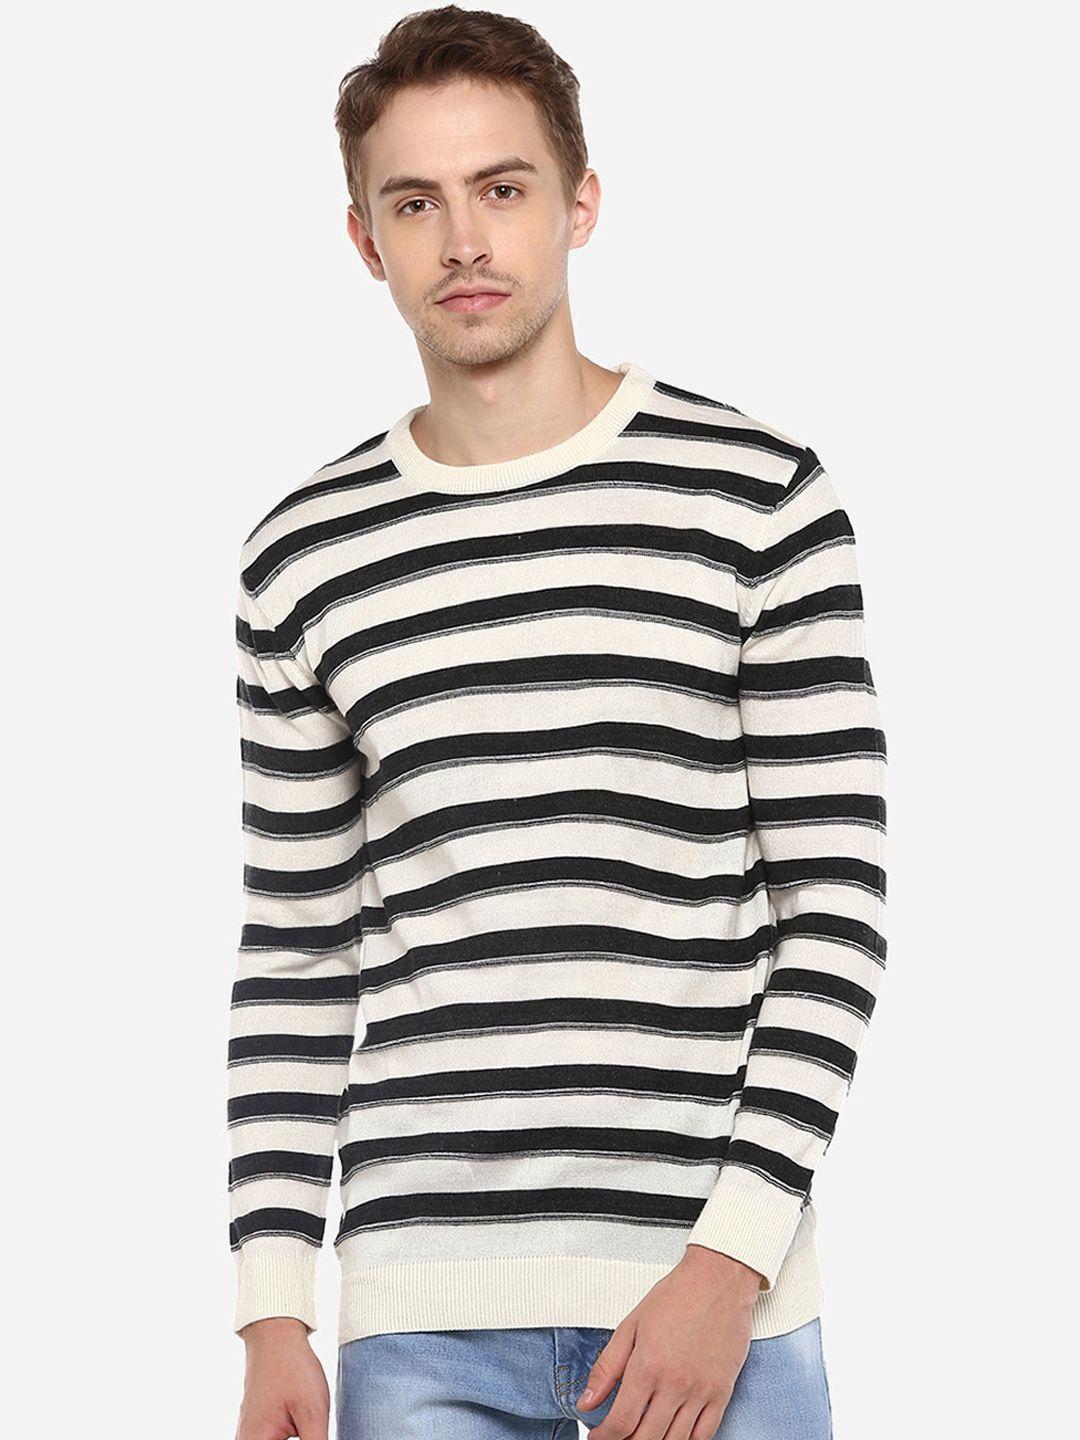 red-chief-men-acrylic-black-and-white-striped-sweater